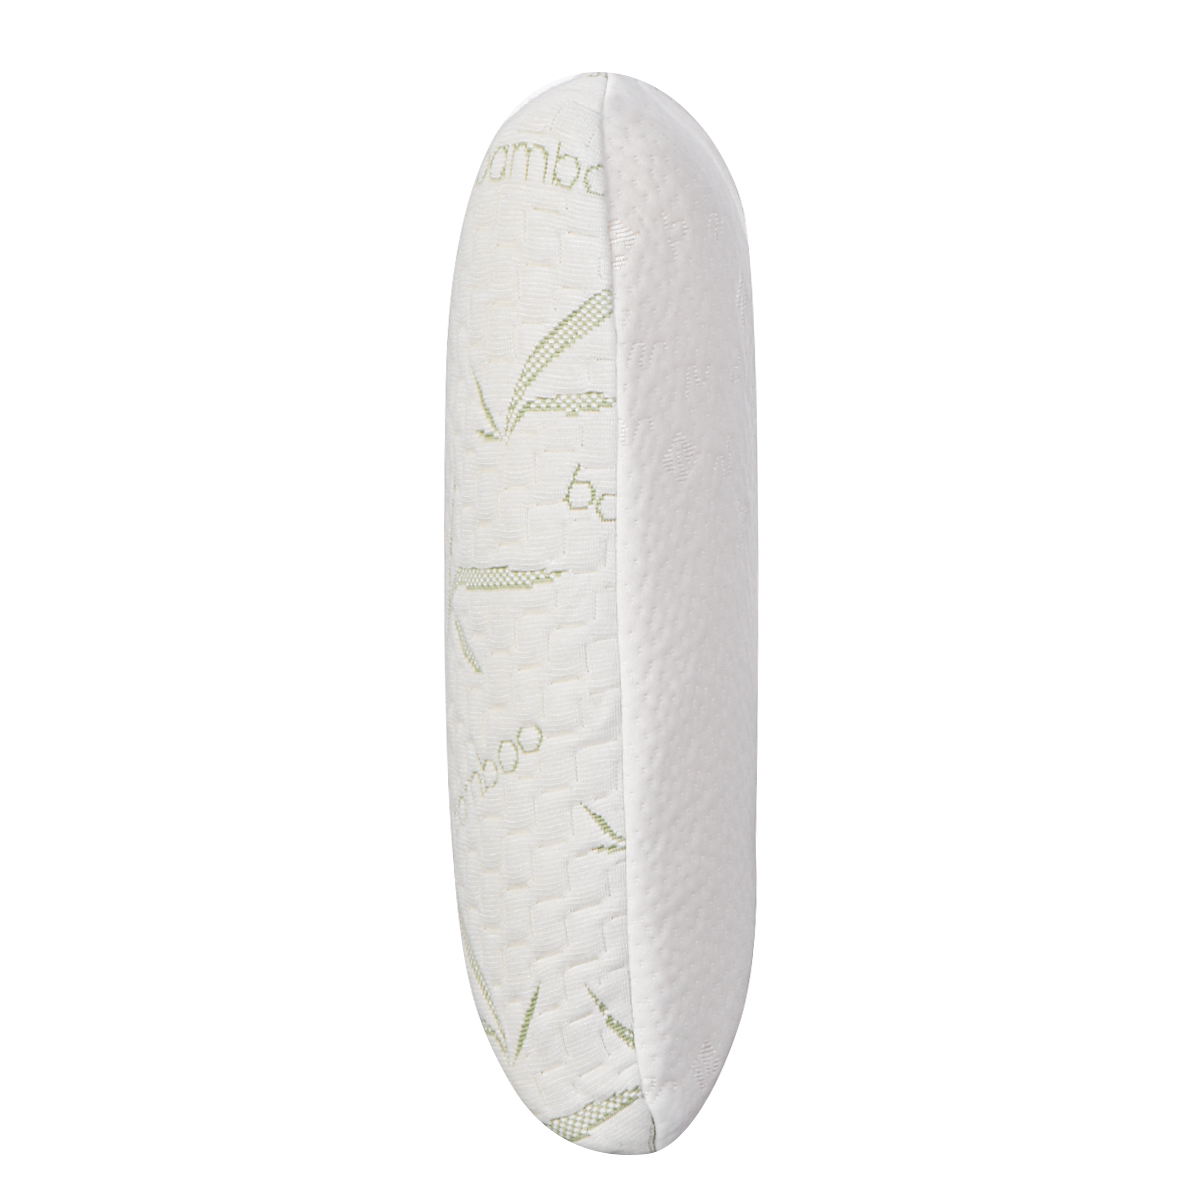 Bamboo-Memory-Foam-Pillow-Reversible-Pillow-Orthopedic-Slow-Rebound-Cervical-Neck-Pain-Relief-1813962-10